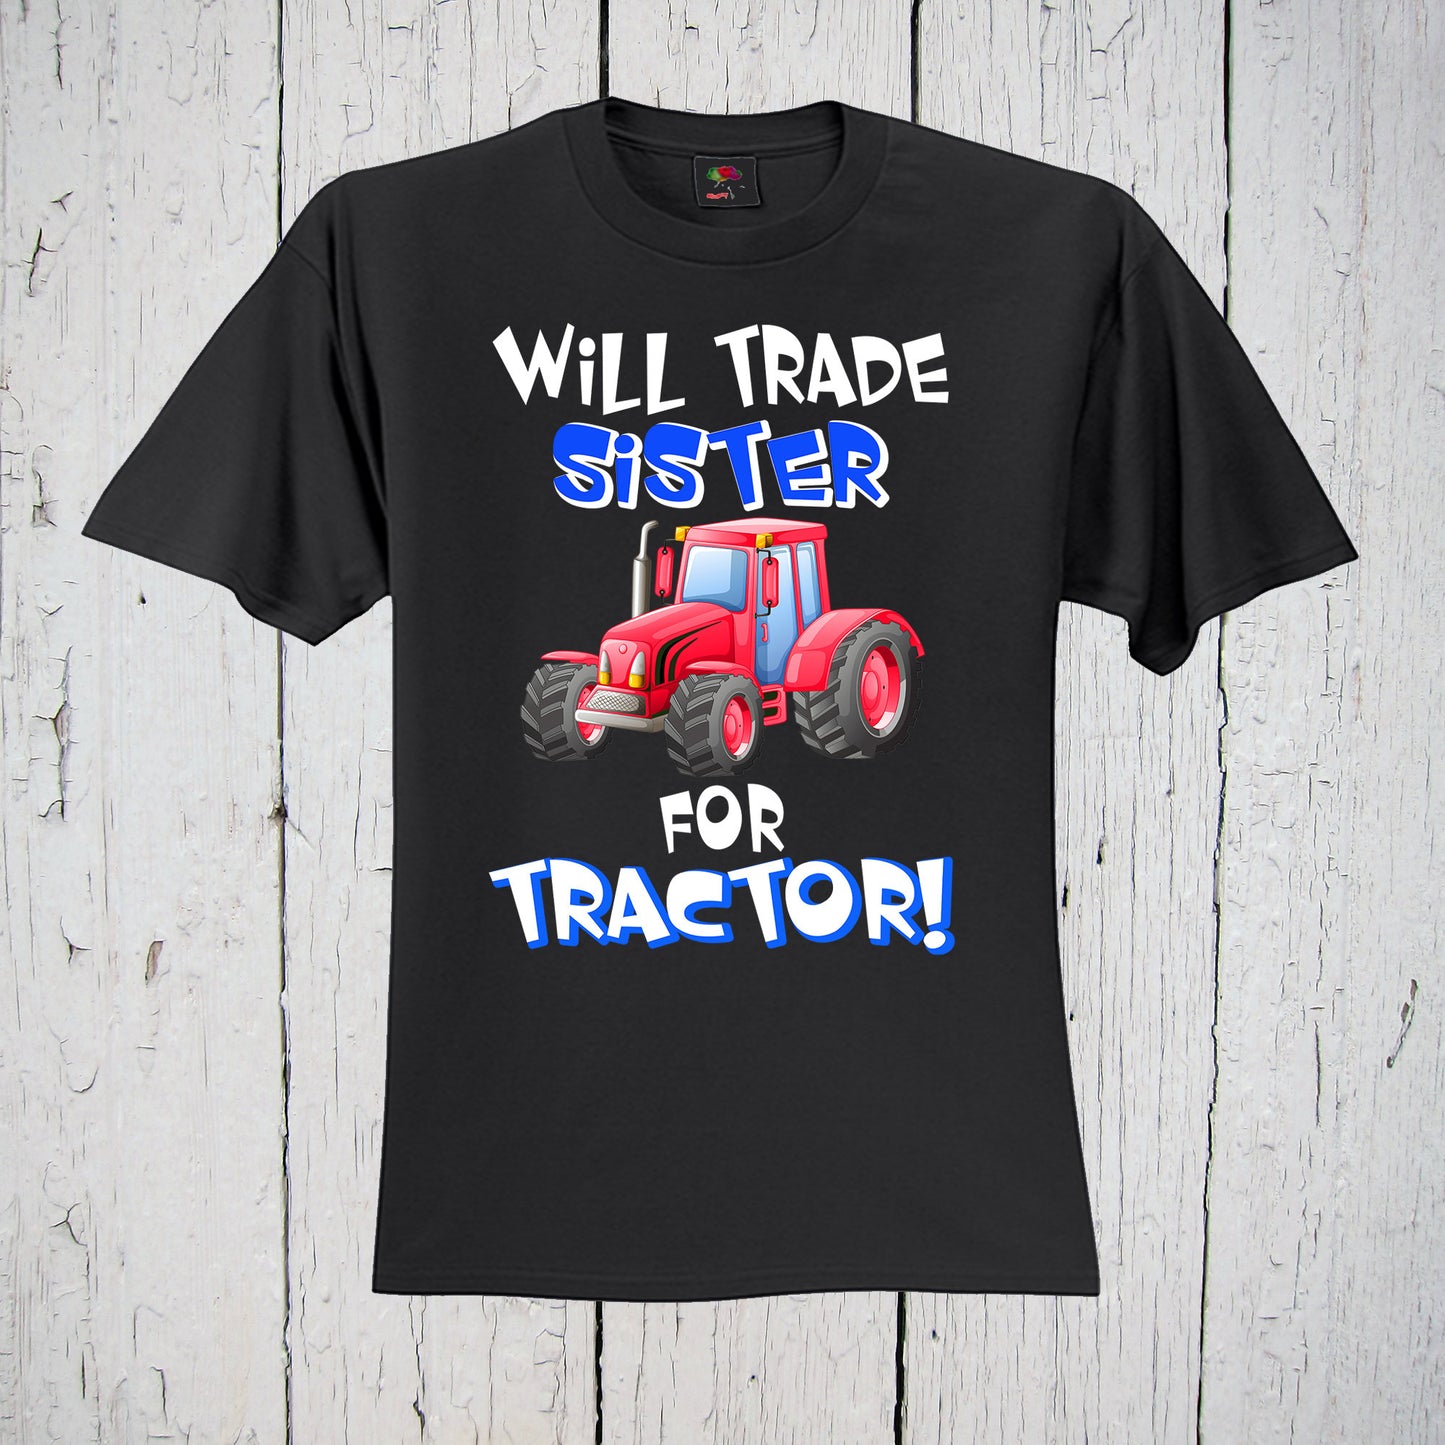 Will Trade Sister for Tractor, Red Tractor, Farm Birthday Shirt, Kids Farm Shirt, Tractor Big Brother, Red Tractor Shirt, Tractor Birthday